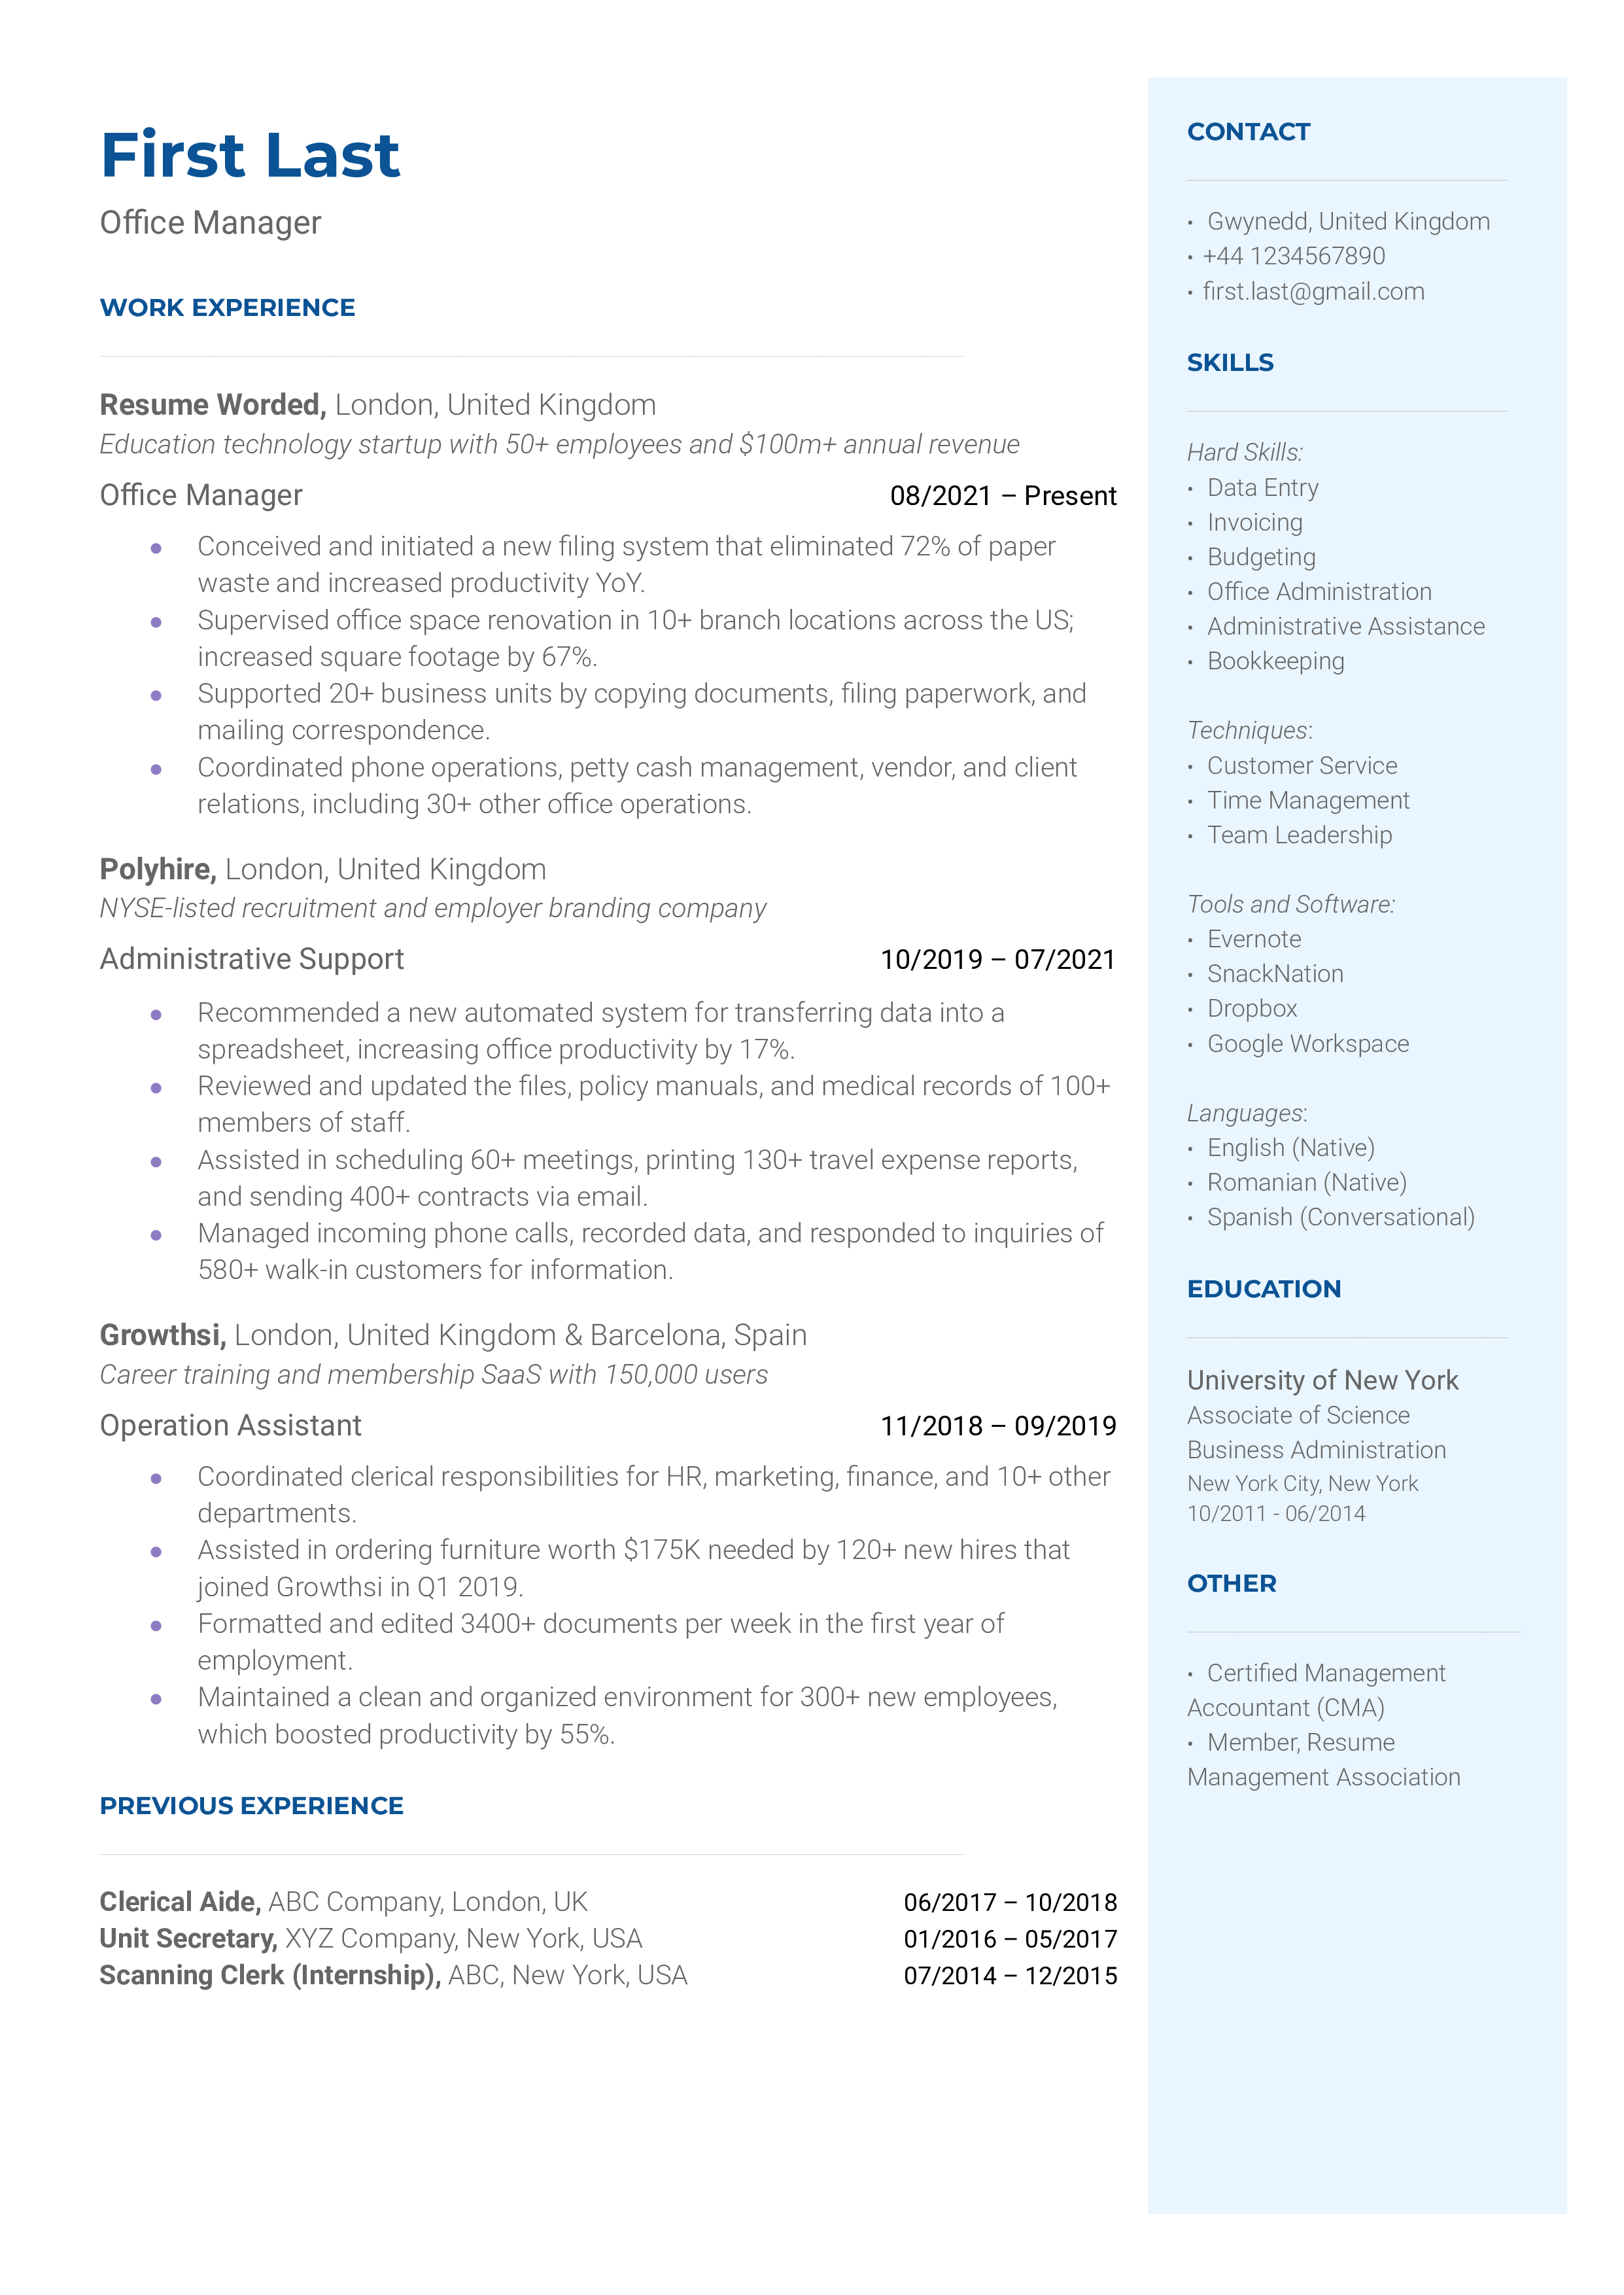 A screenshot of a well-organized CV for an office manager role.